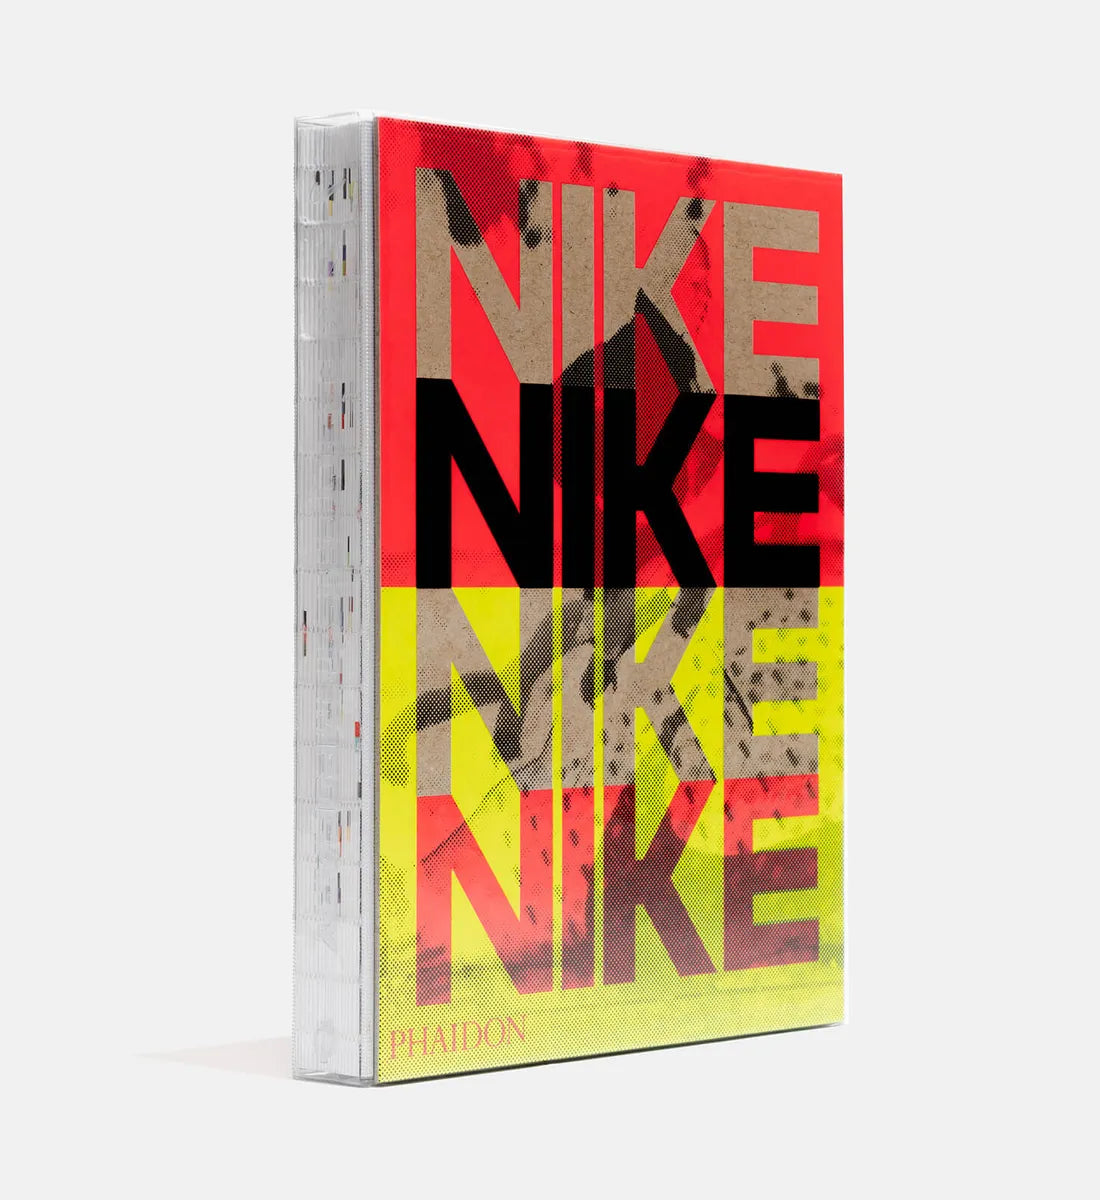 Phaidon: Nike. Better is Temporary